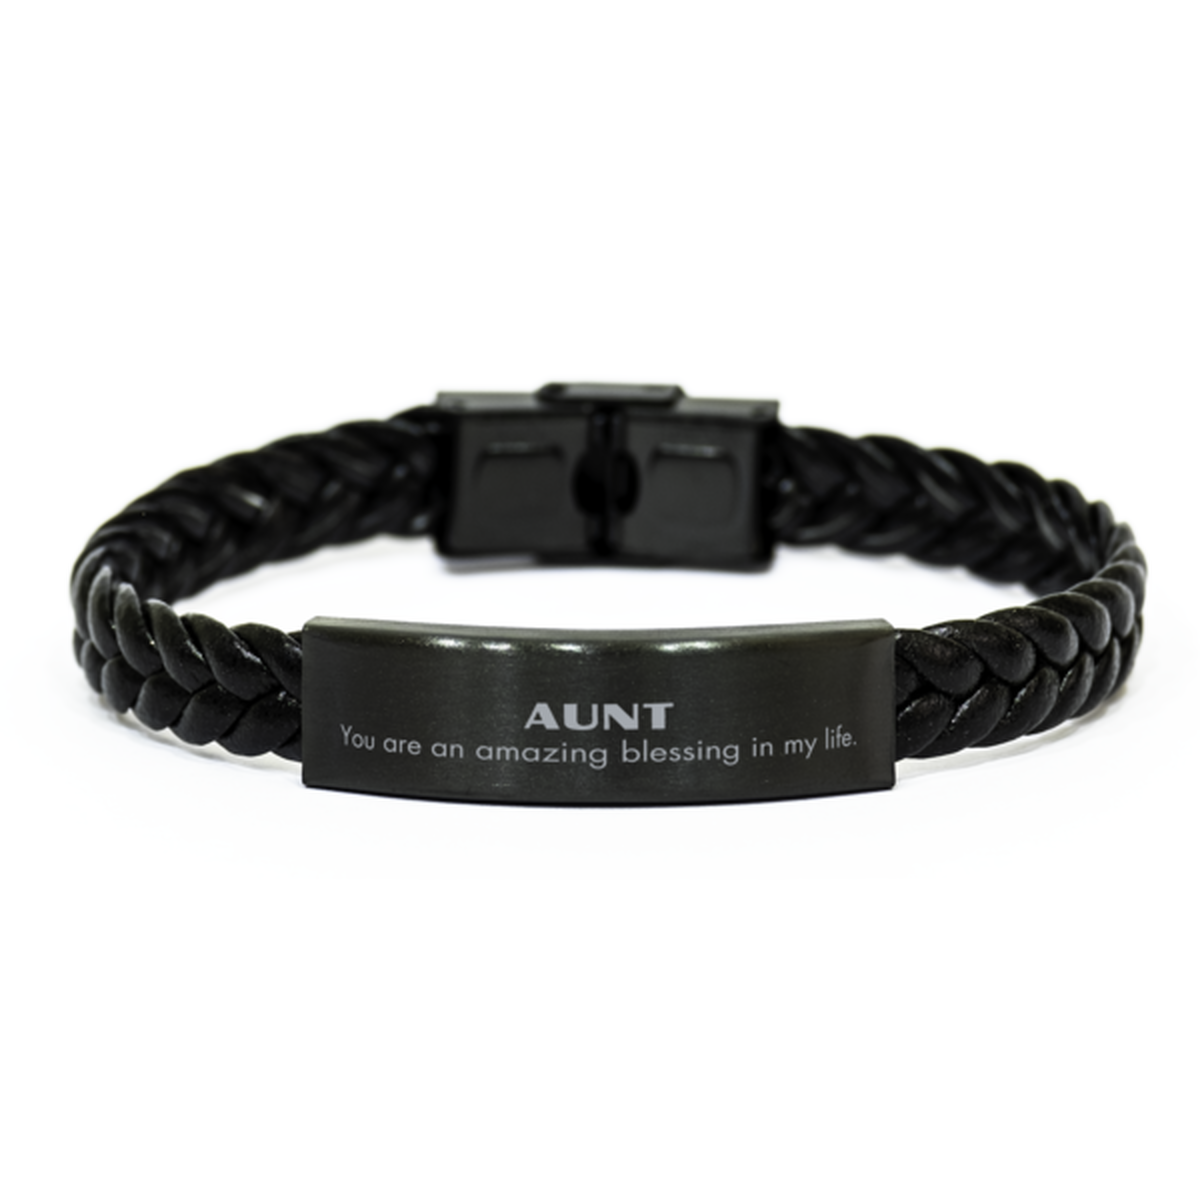 Aunt Braided Leather Bracelet, You are an amazing blessing in my life, Thank You Gifts For Aunt, Inspirational Birthday Christmas Unique Gifts For Aunt